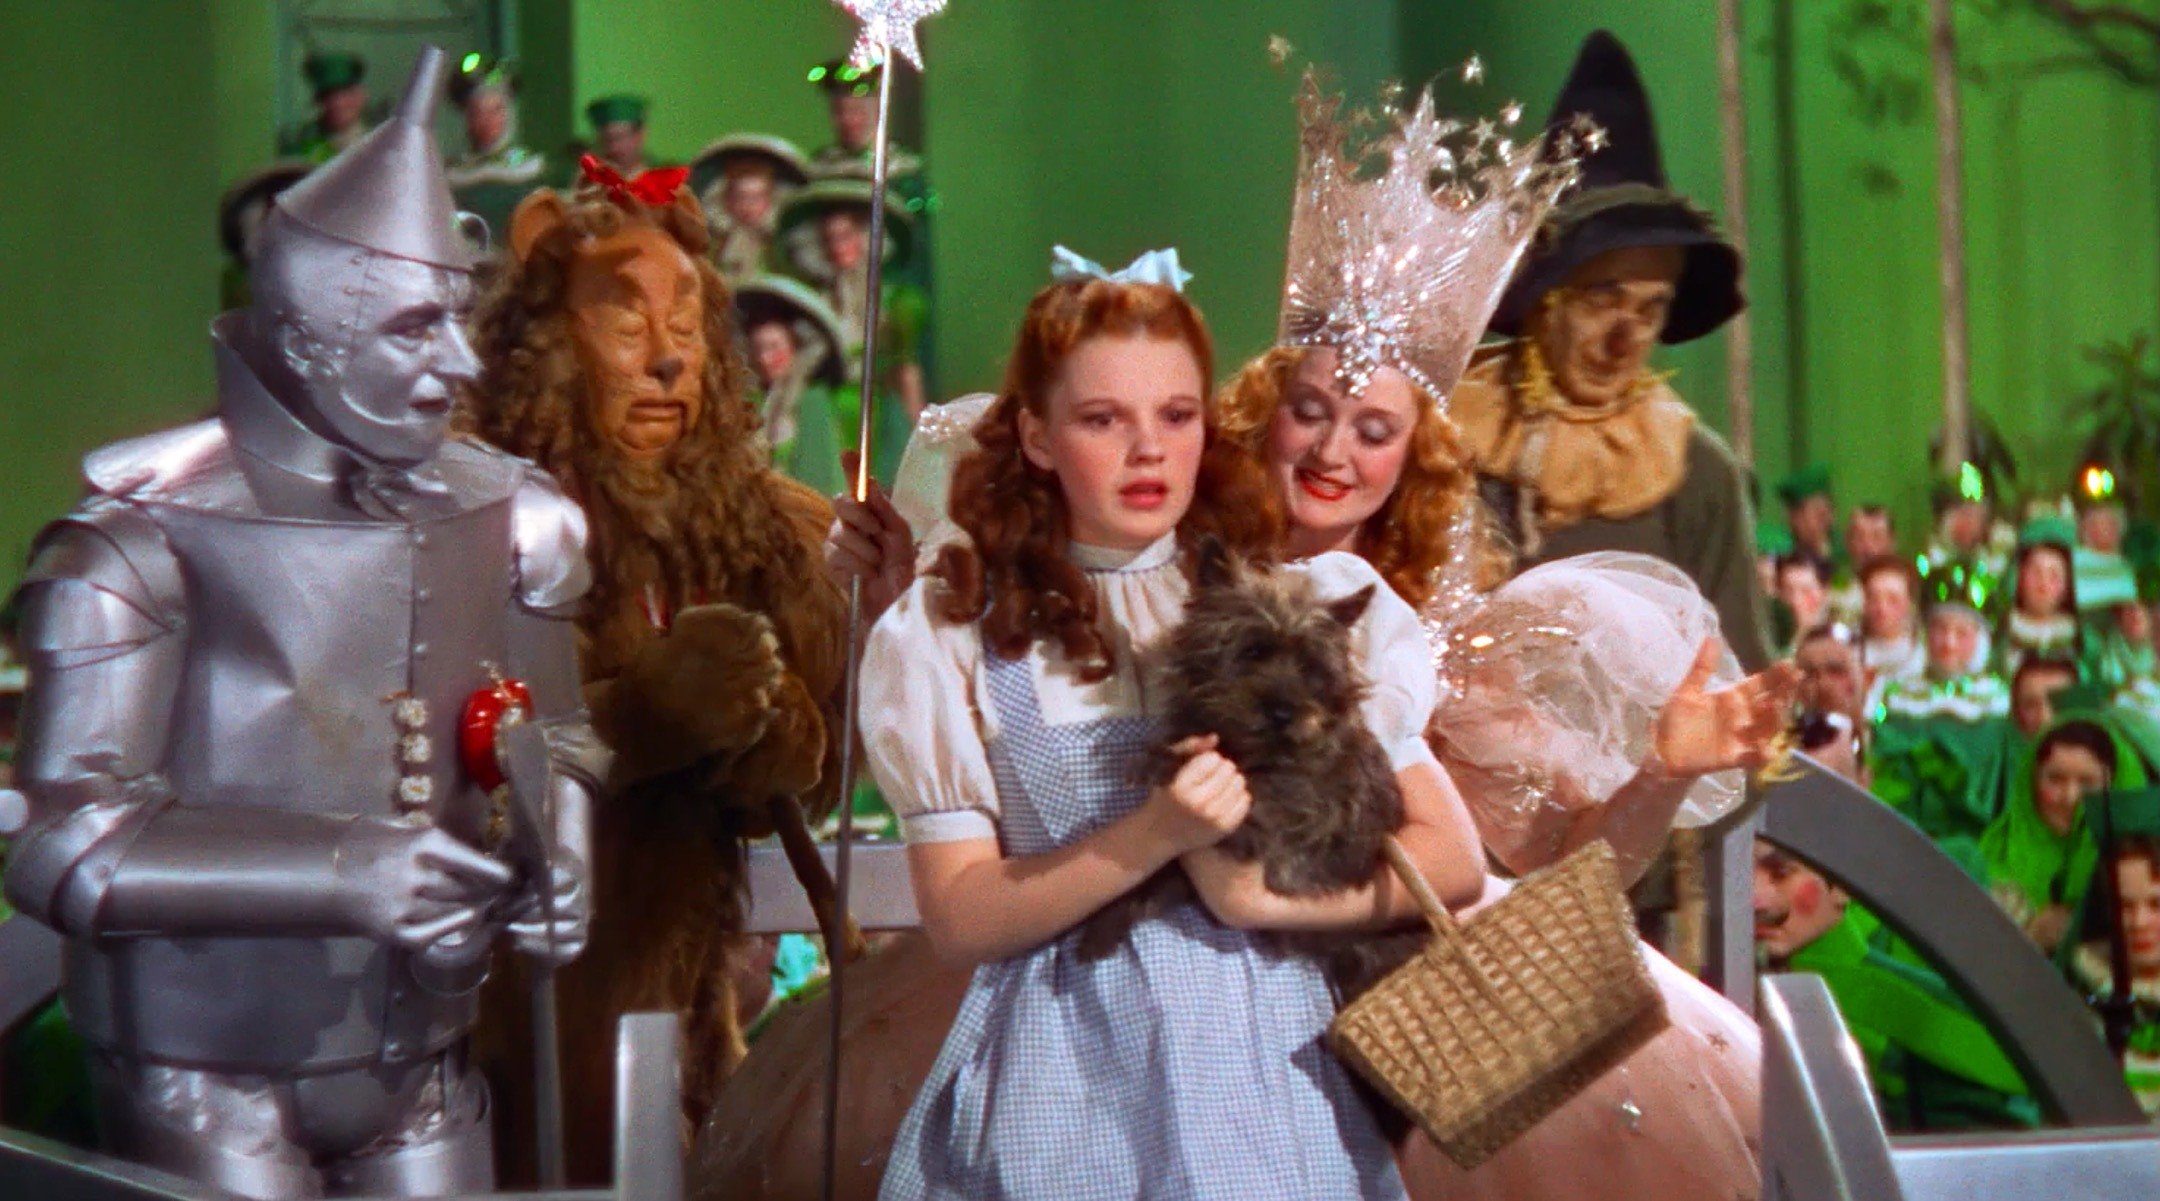 Behind the Curtain: The Wizard of Oz - The American Society of